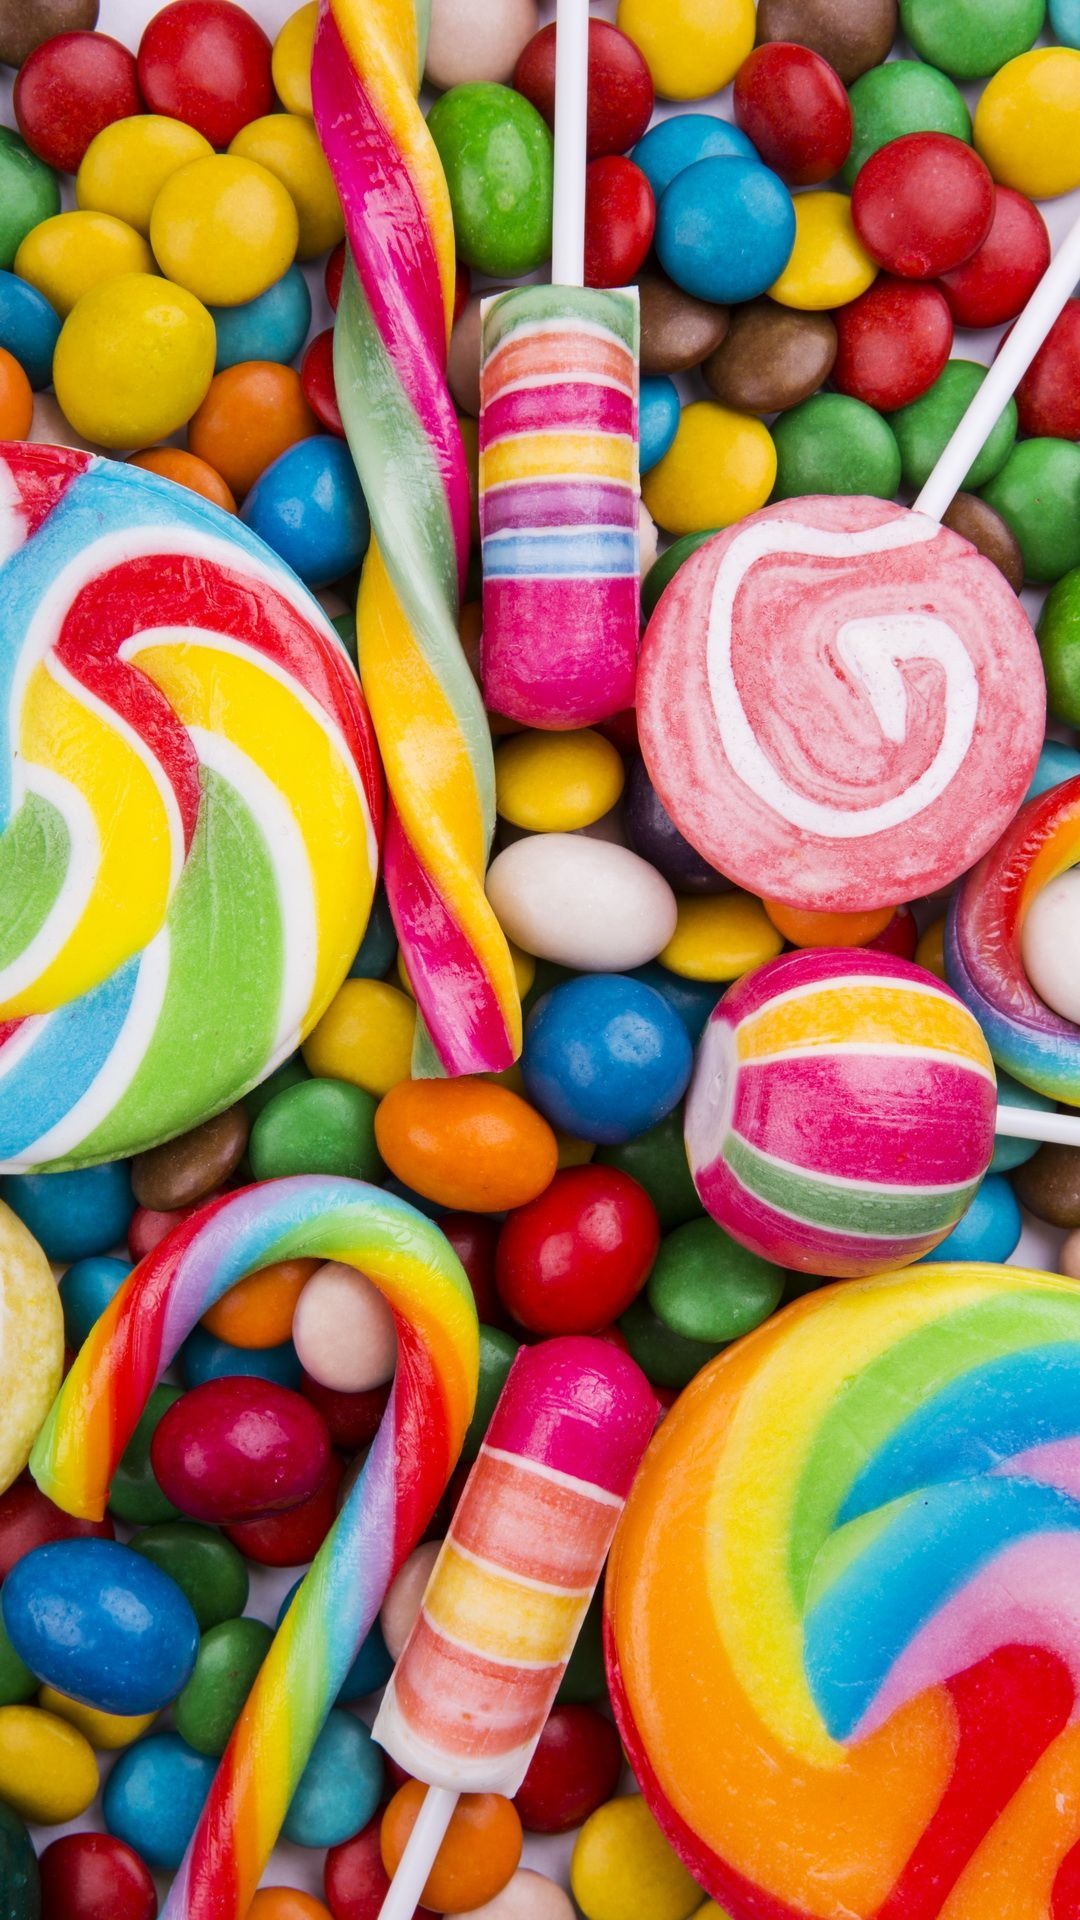 Candies wallpaper, Colorful and vibrant, Irresistible treats, Mouthwatering delight, 1080x1920 Full HD Phone